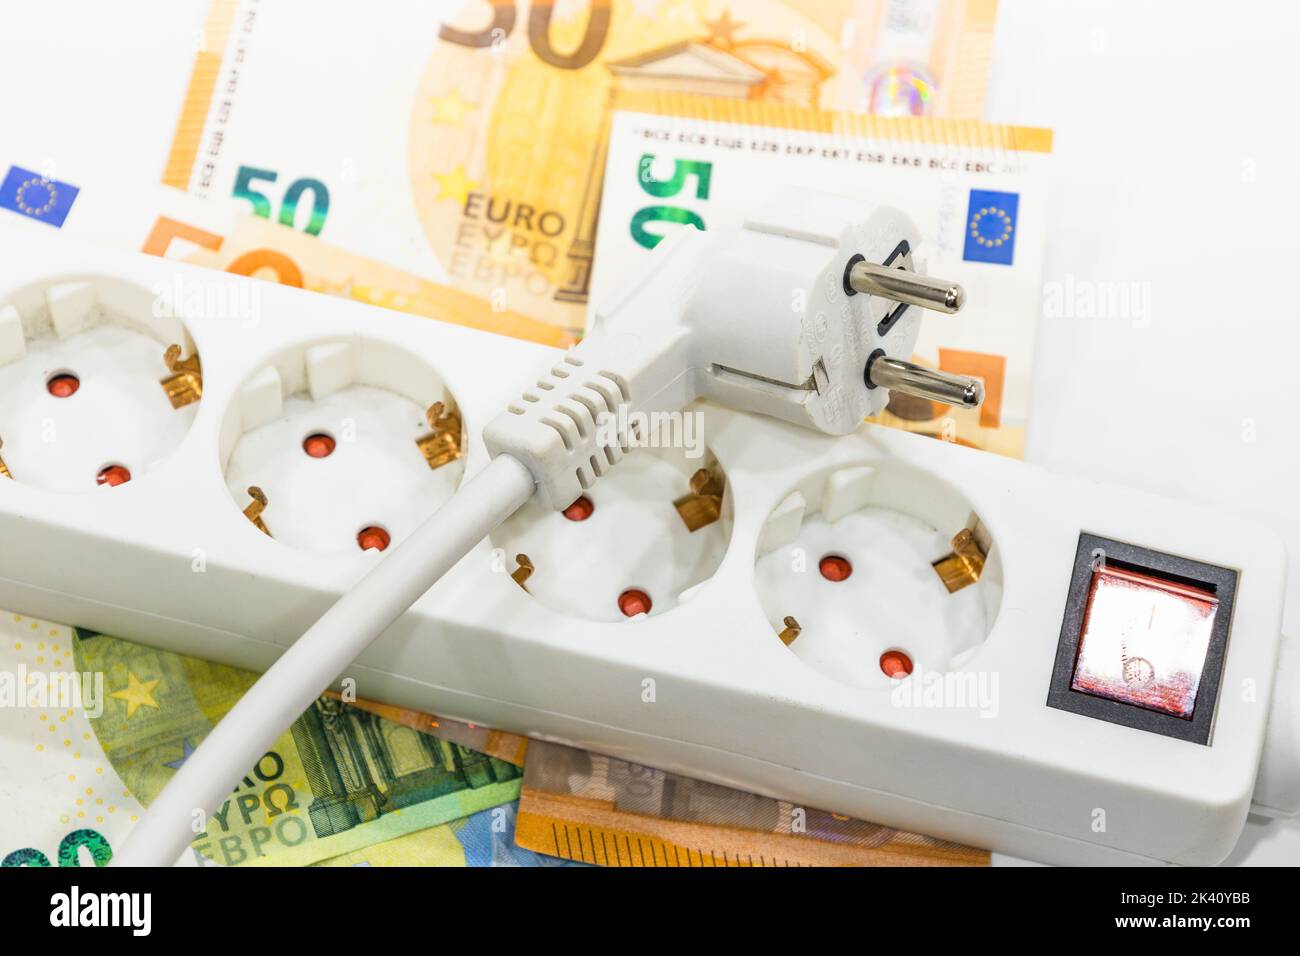 Outlet extension socket and euro banknotes. Concept of rising electricity prices Stock Photo